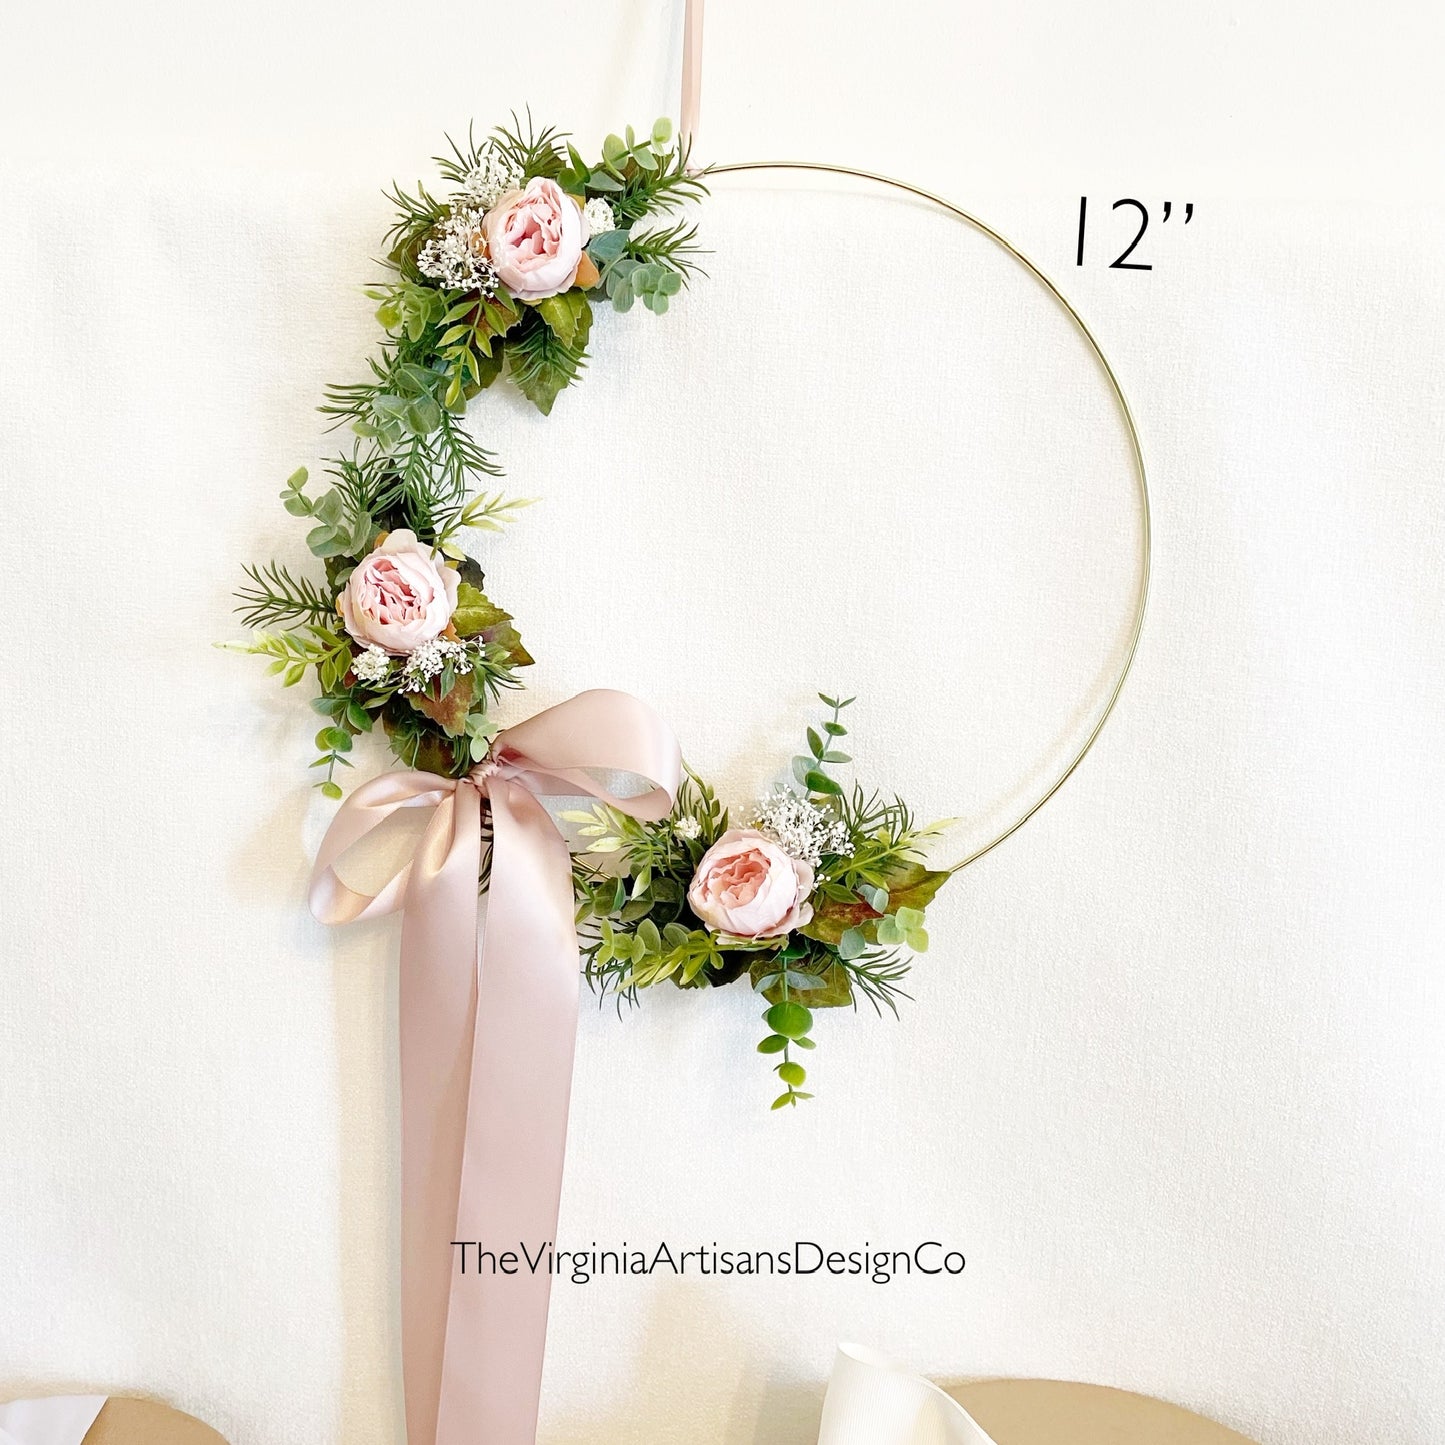 10 - 19 Inch Hoop Wreath White or Blush Peony Florals